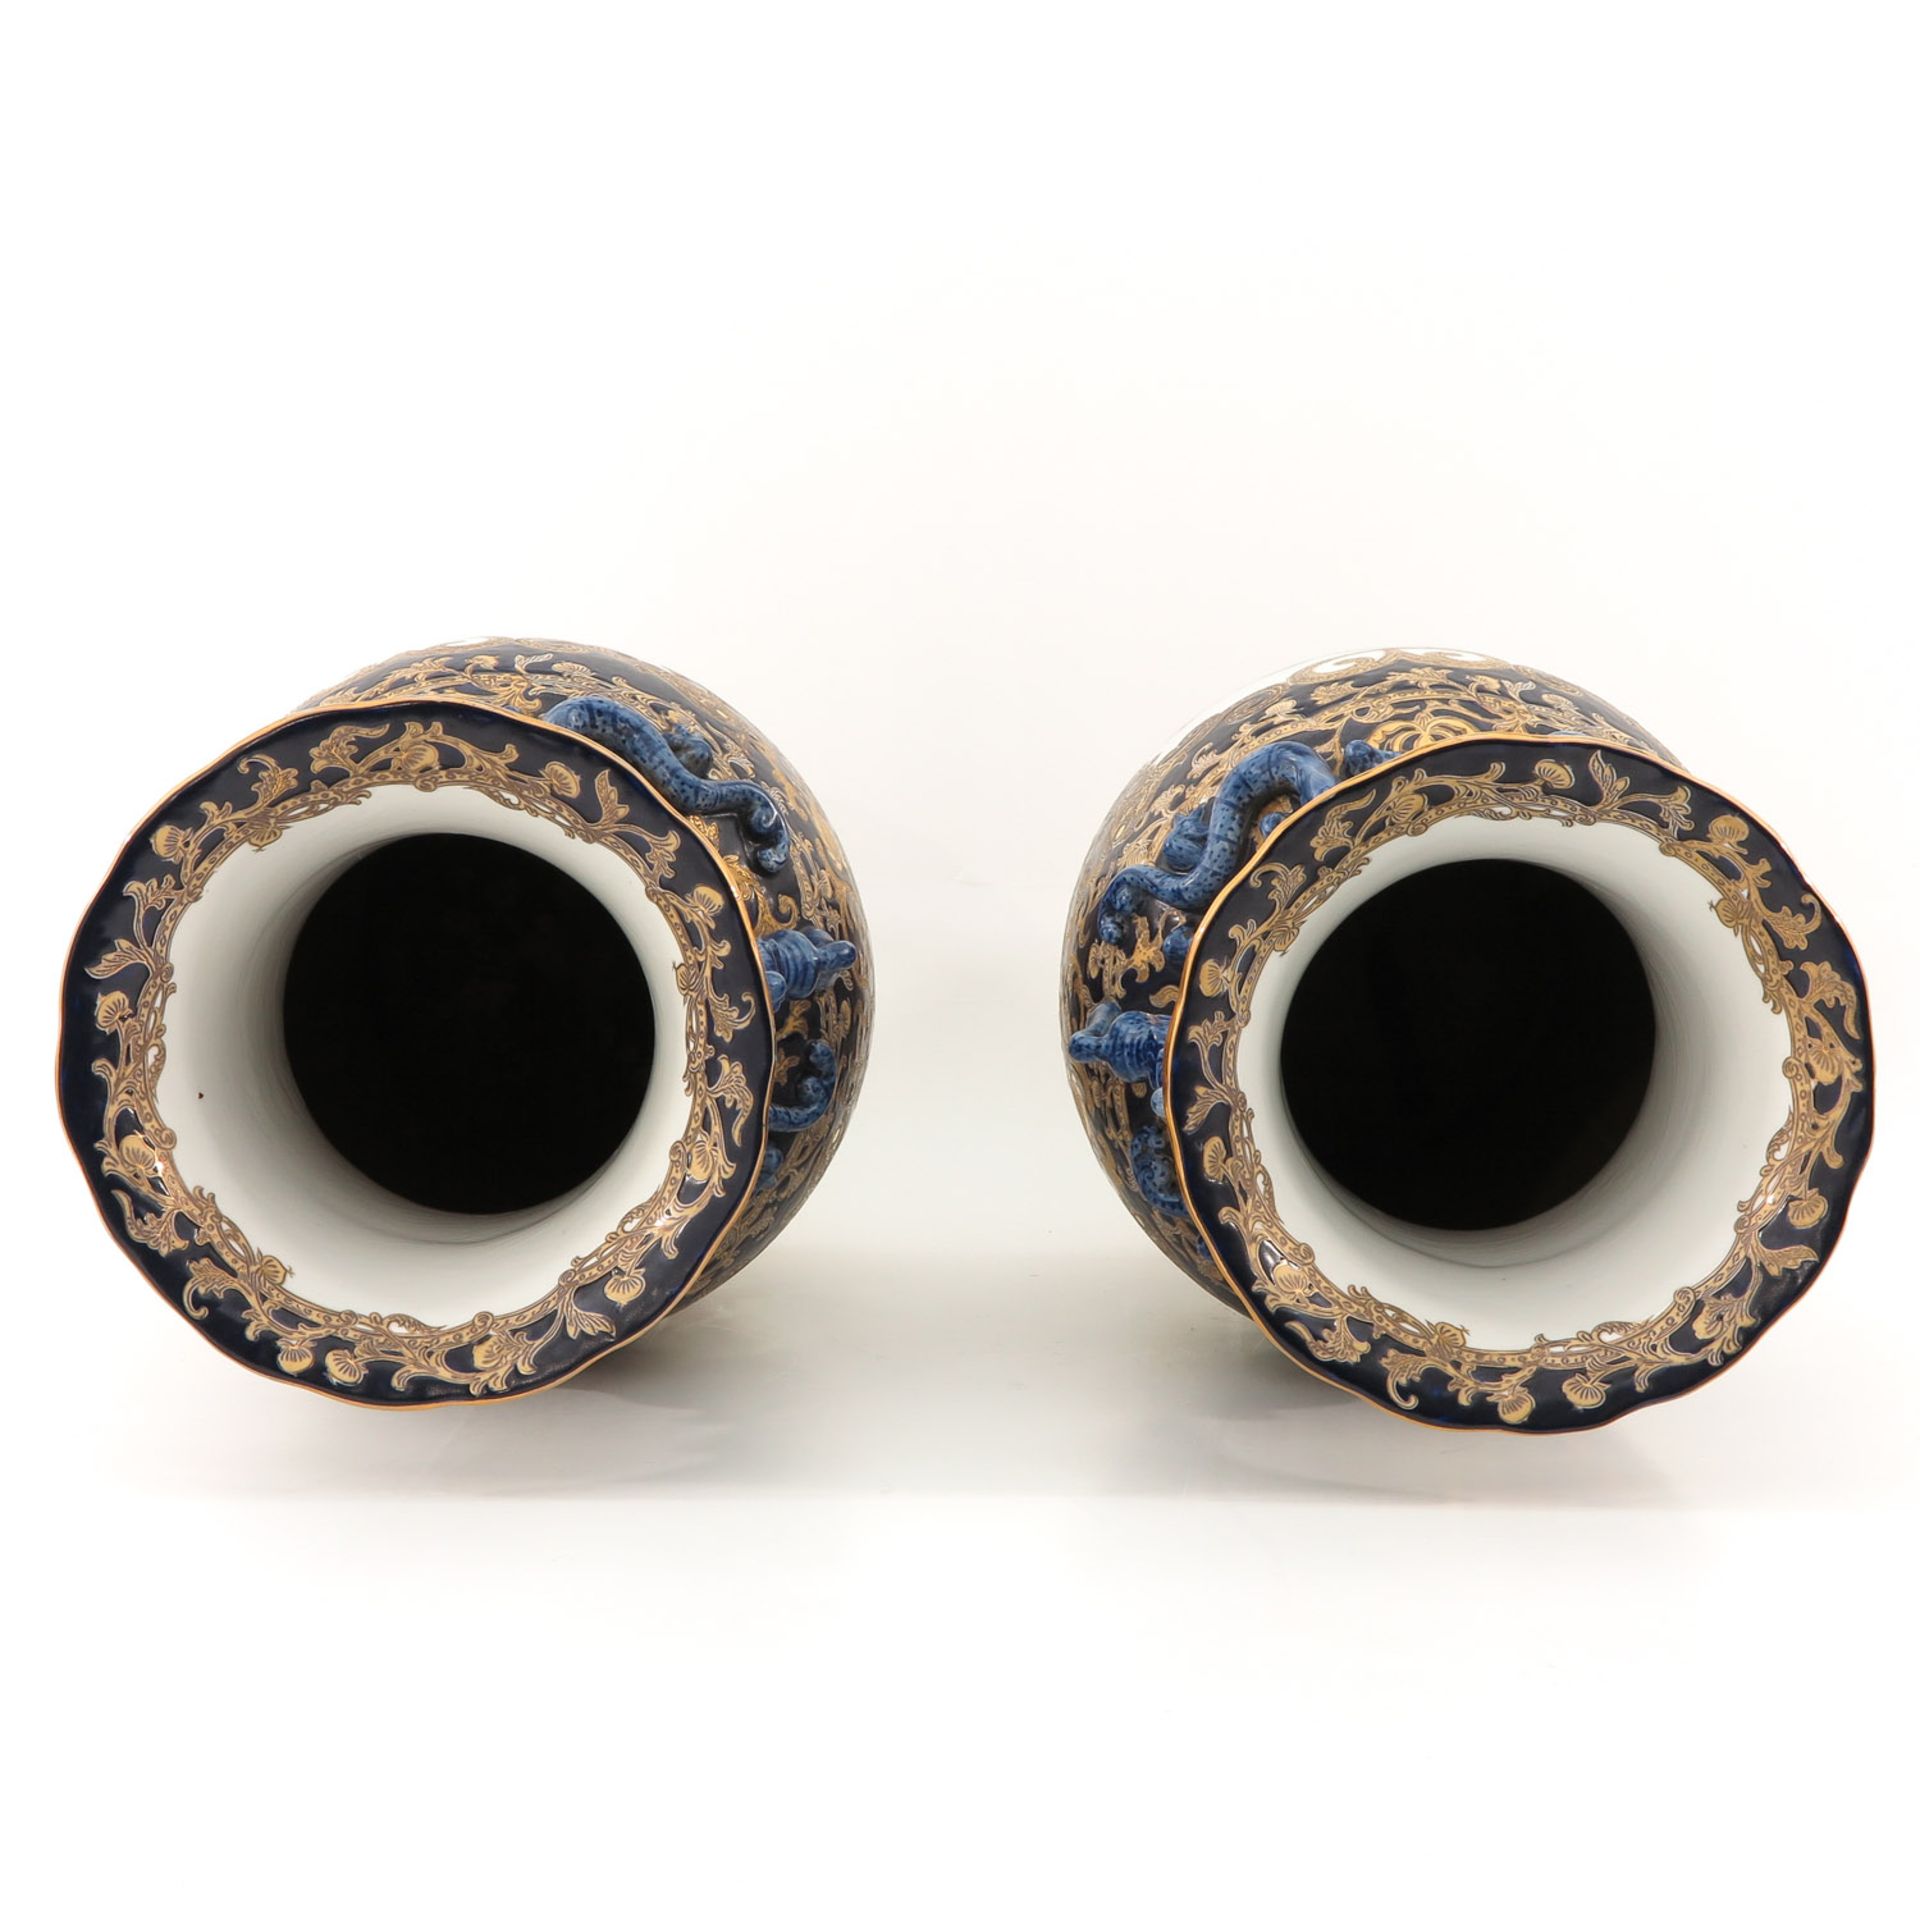 A Pair of Macao Vases - Image 5 of 10